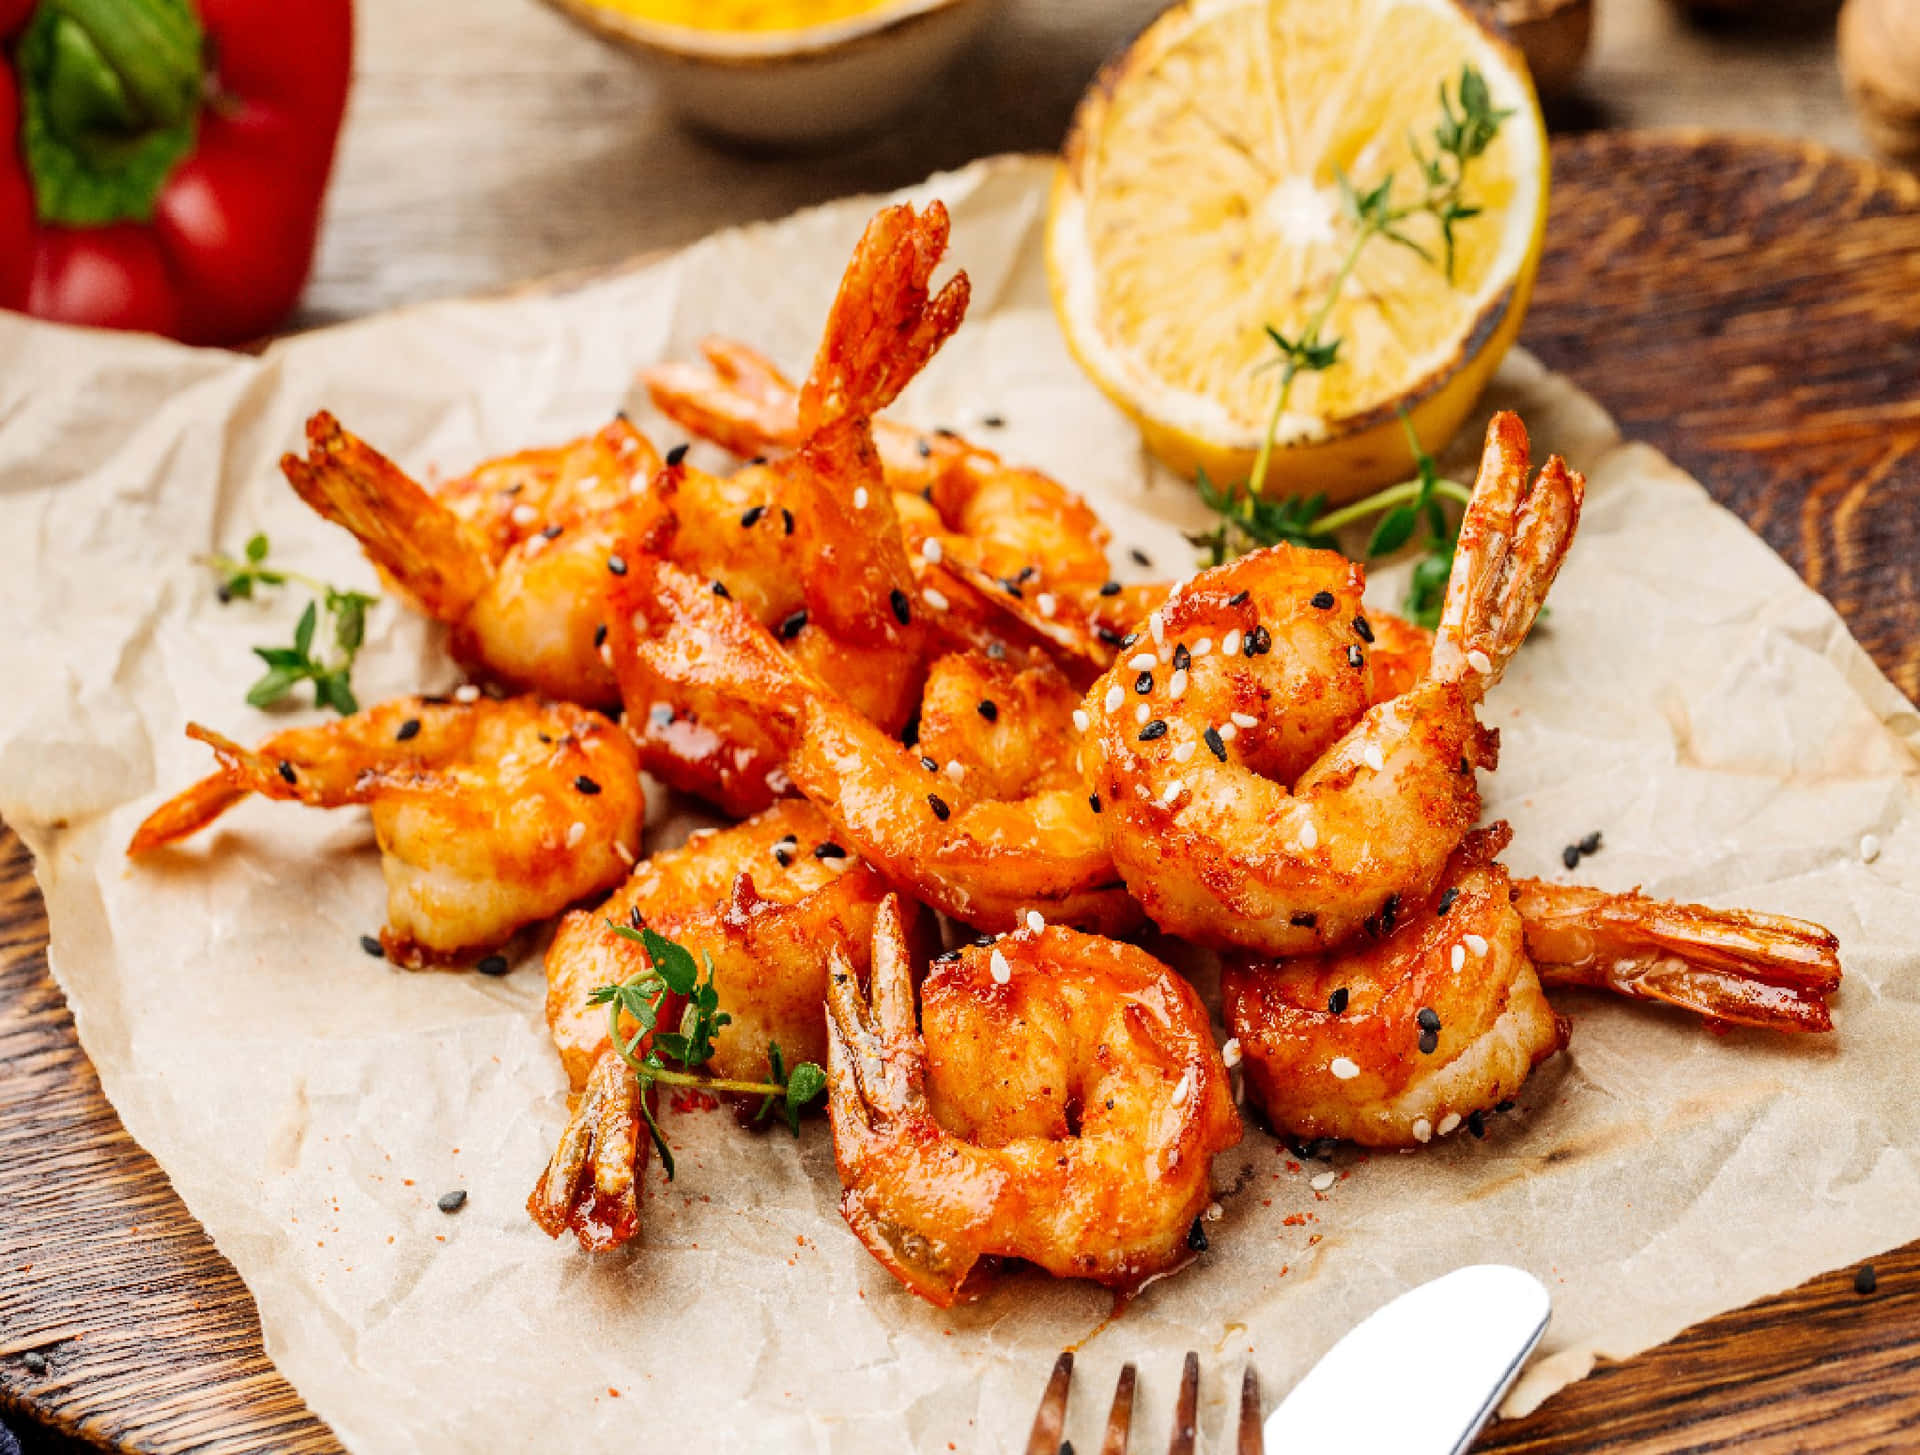 Shrimp On Wooden Board With Lemon Picture